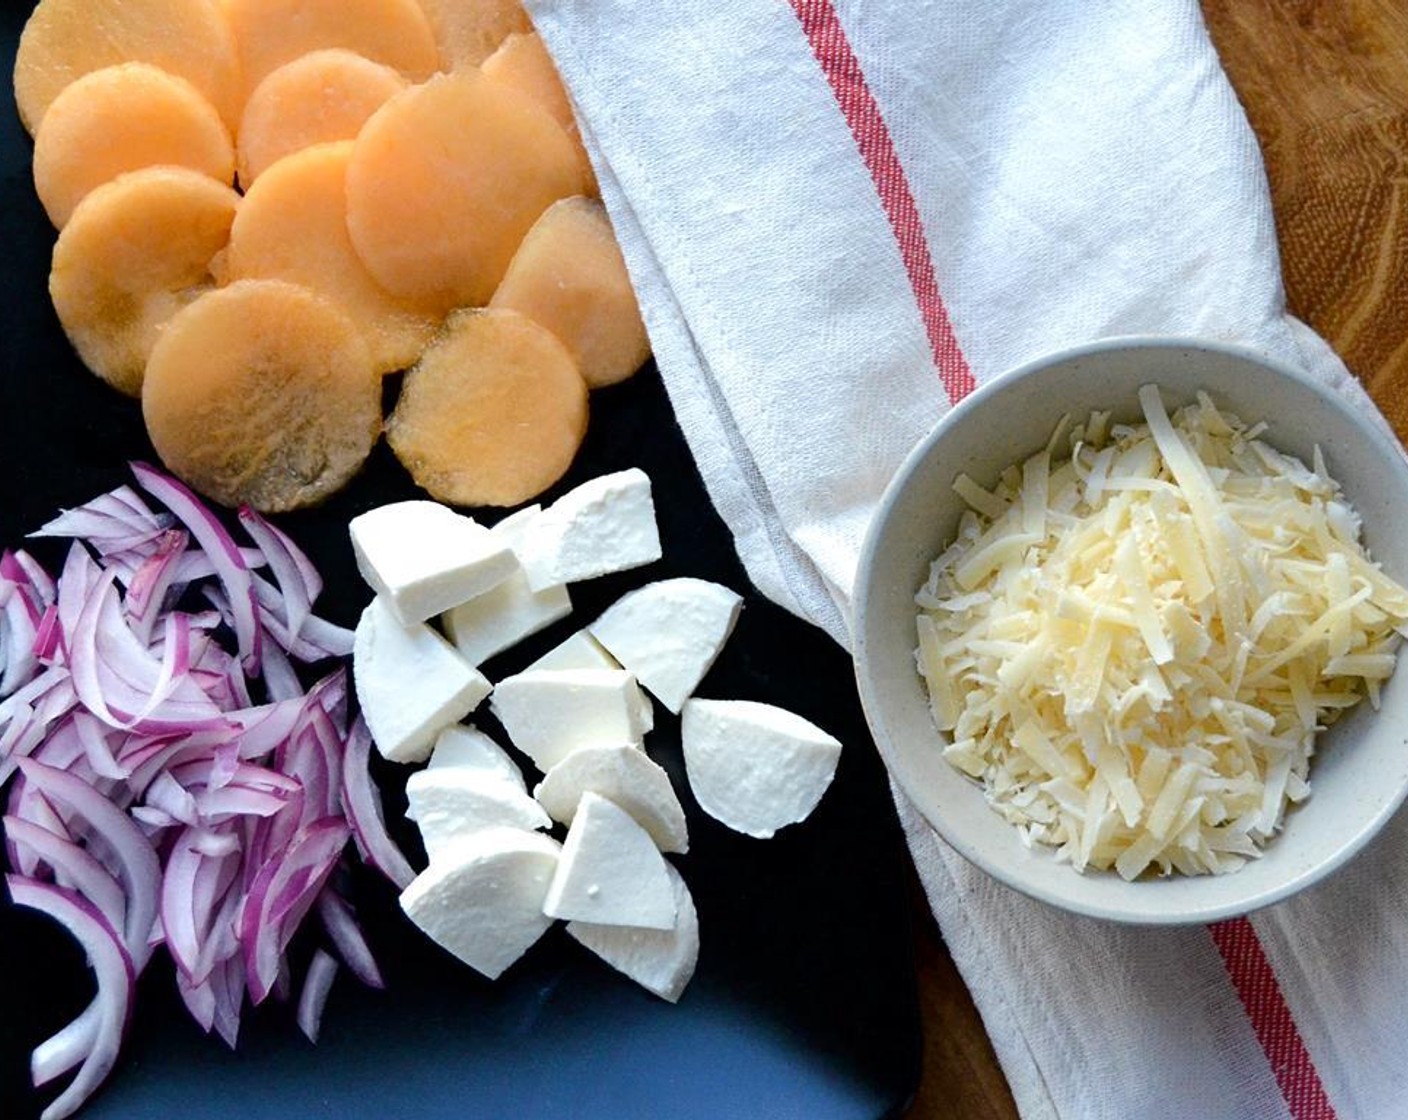 step 15 Assemble these ingredients by the grill: pizza dough, olive oil (and pastry brush), pancetta, cantaloupe, Mozzarella Cheese (4 cups), Red Onion (1/4), Parmesan Cheese (1 cup).